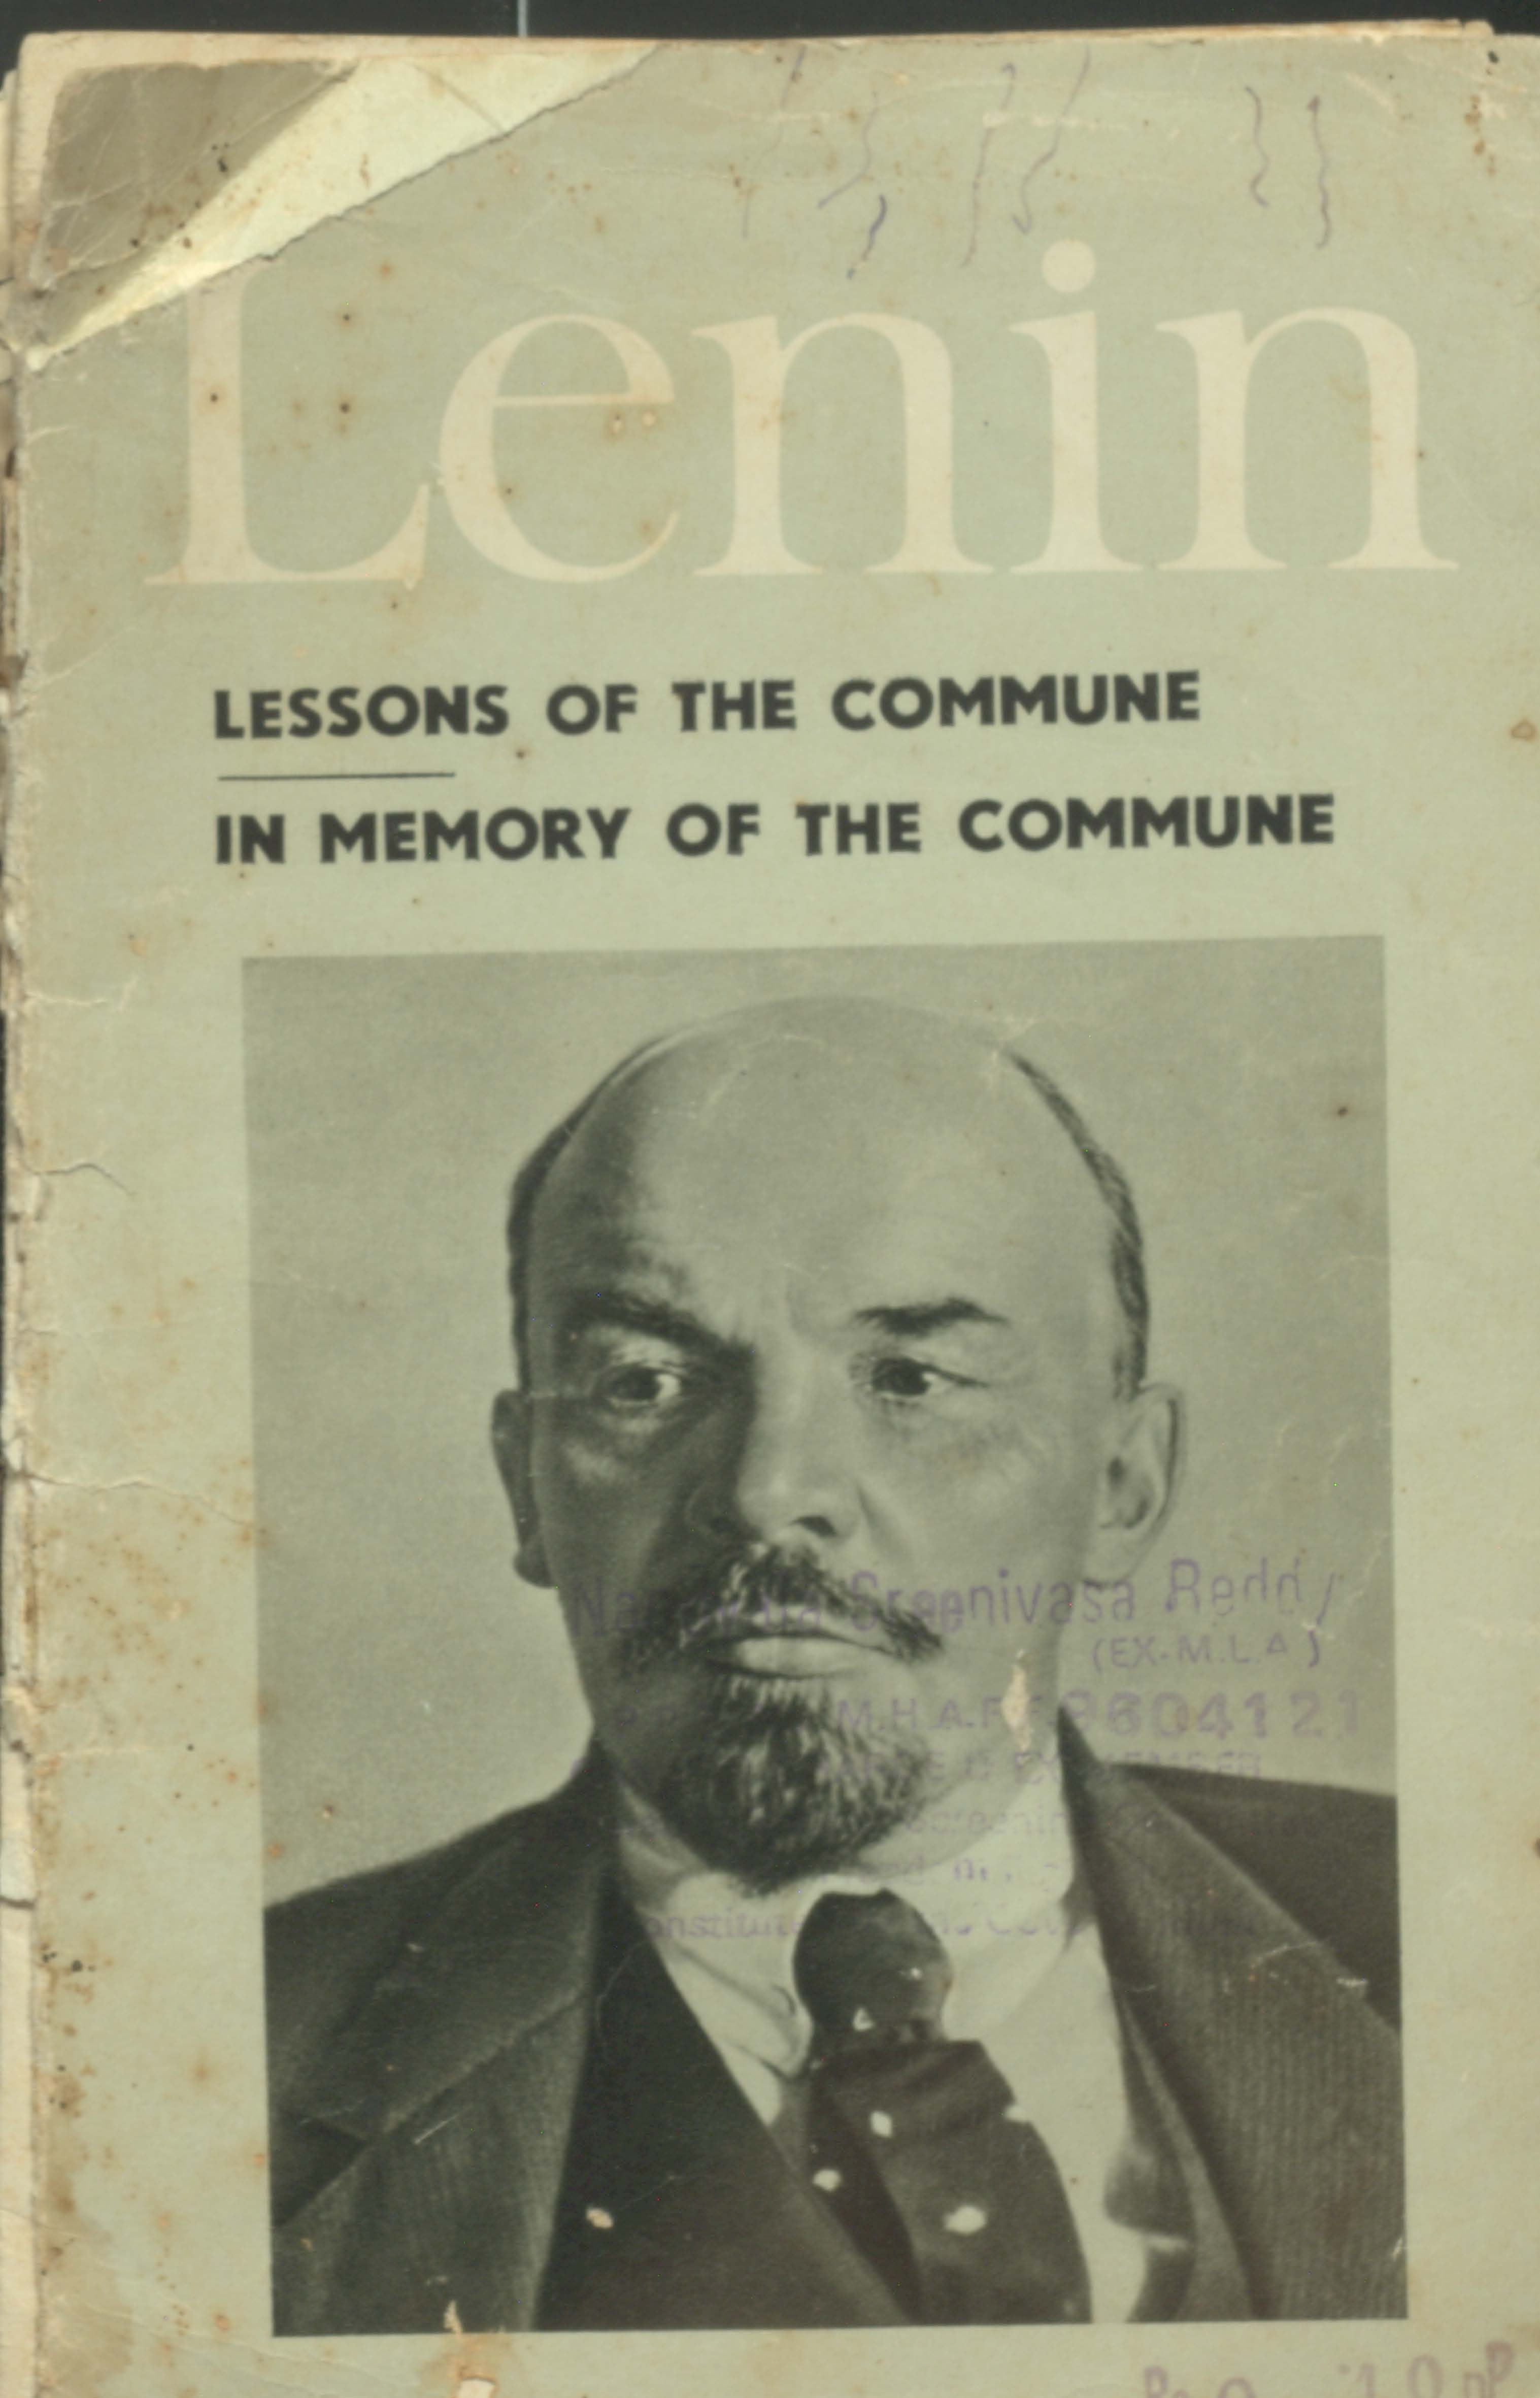 Lenini Lessons of the Commune in memory of the Commune